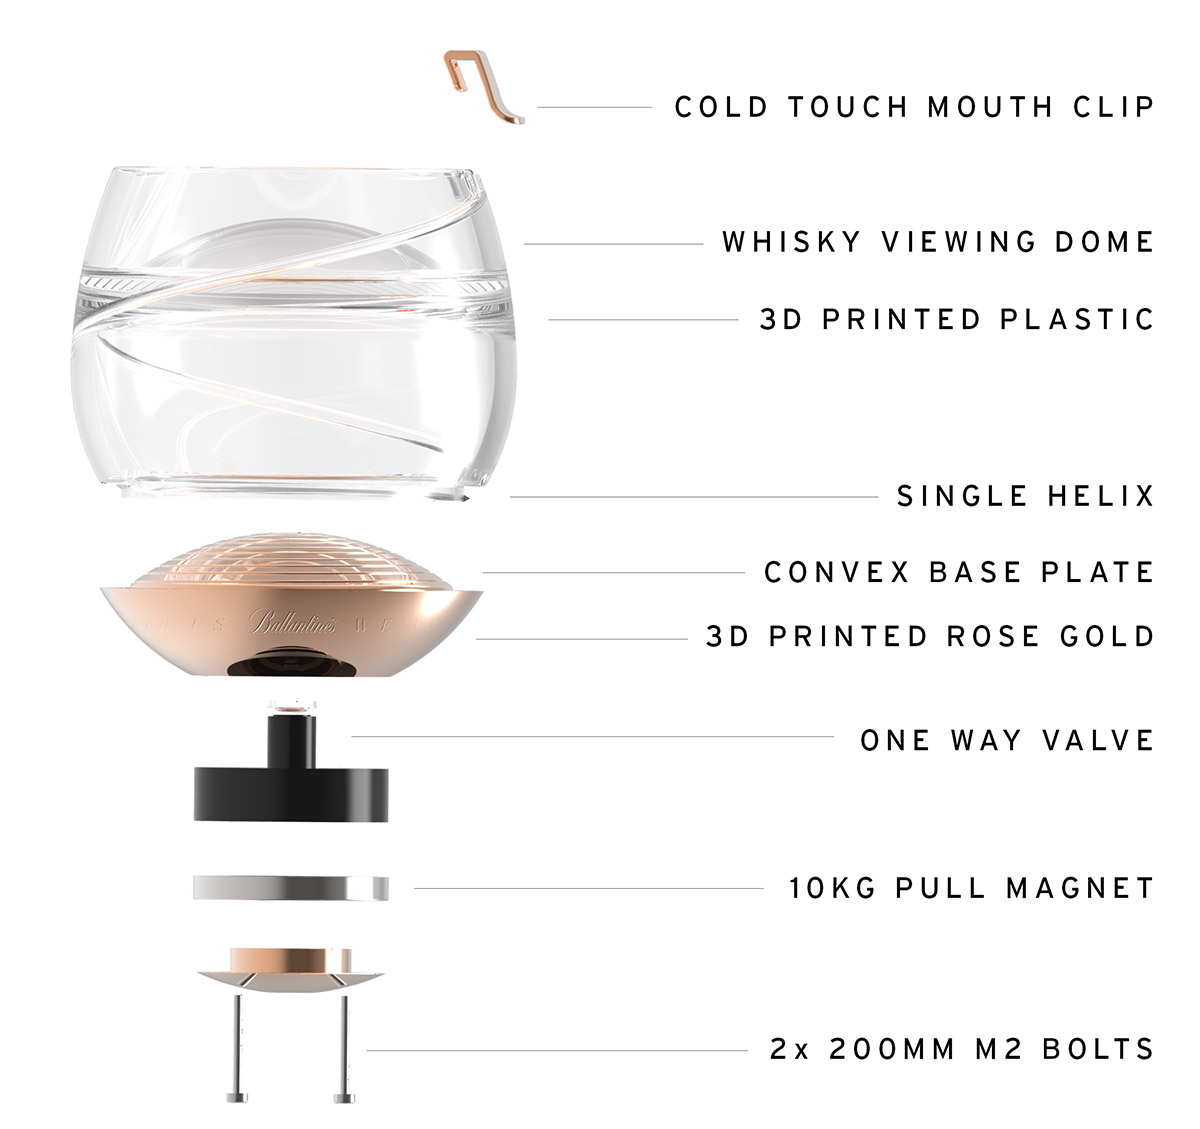 This Glass Will Let You Enjoy Whiskey in Microgravity